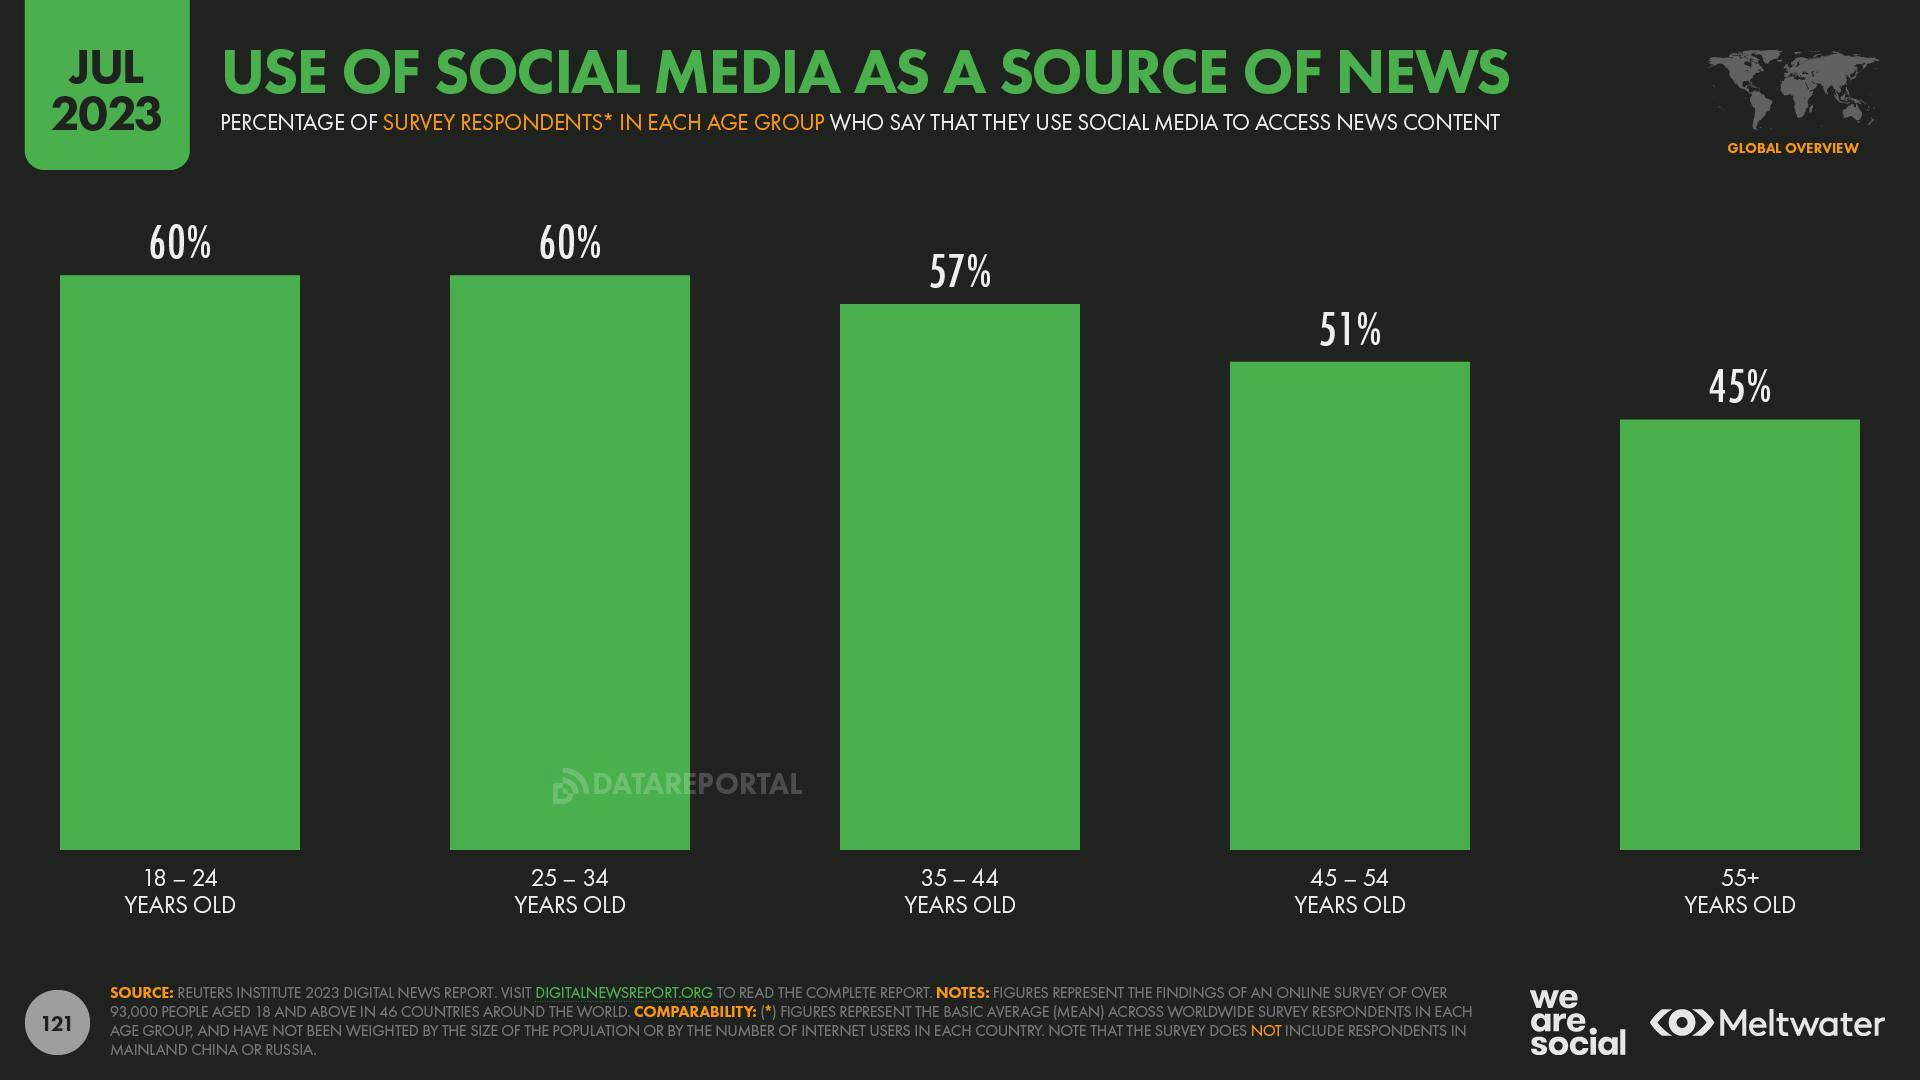 A bar chart showing use of social media as a source of news source, with the highest percentage, 60%, belonging to the 18 to 24 age range, according to RISJ survey data.